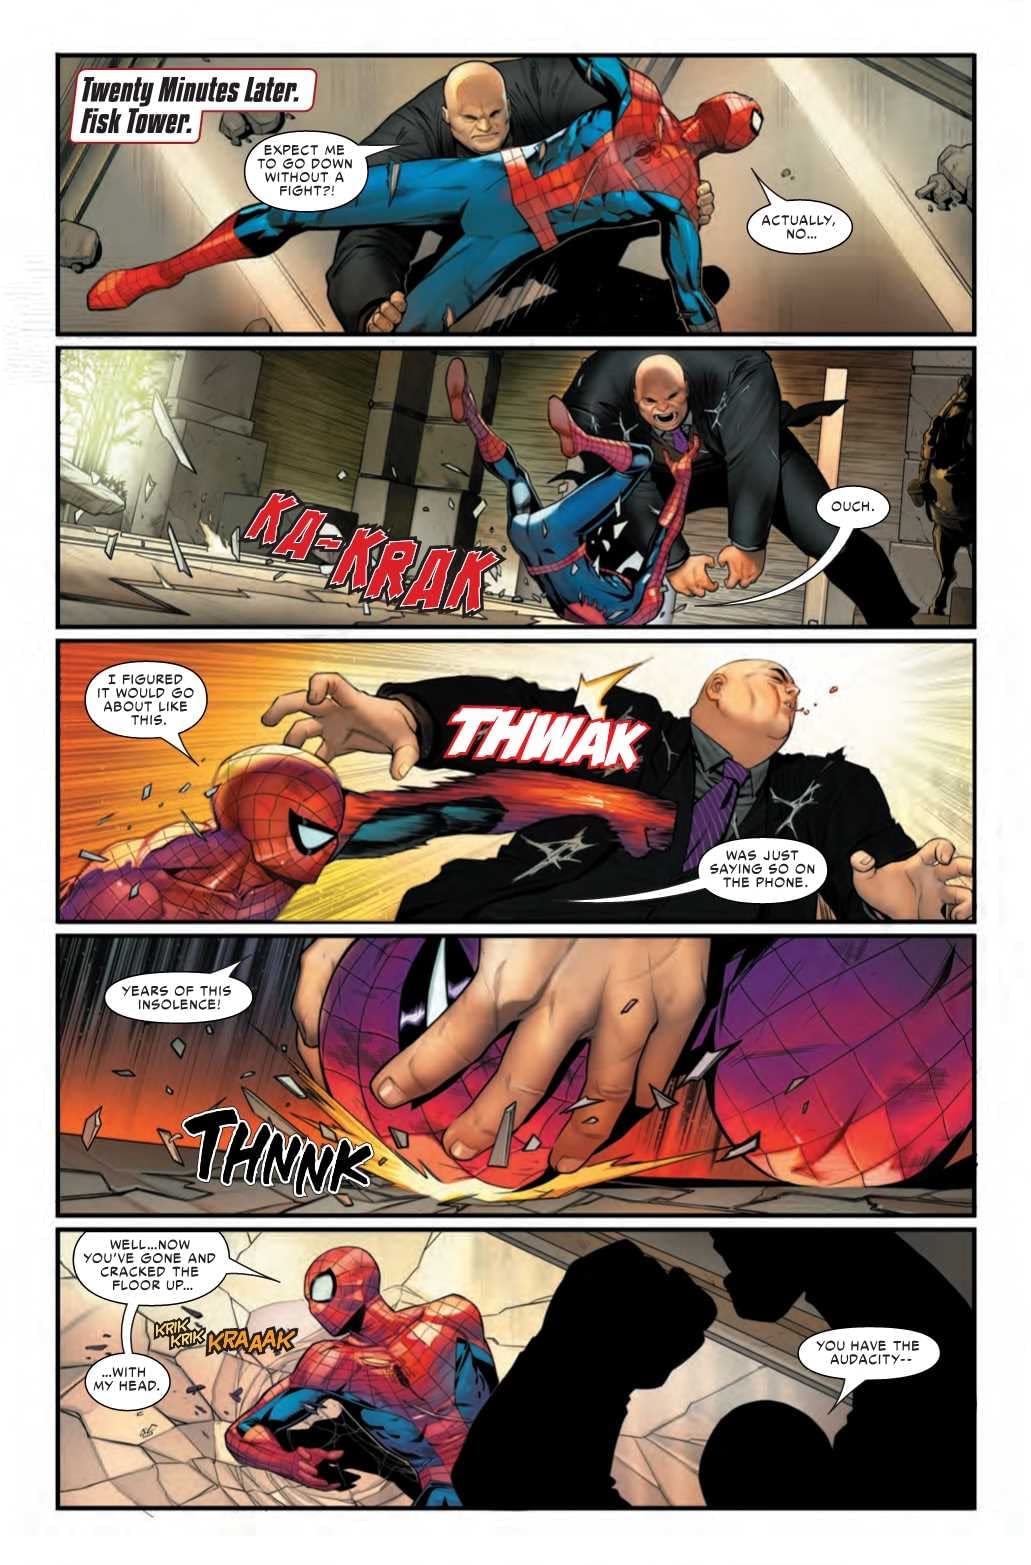 What if Your Comic Book Had a HUD? Spider-Man: City at War #1 Preview